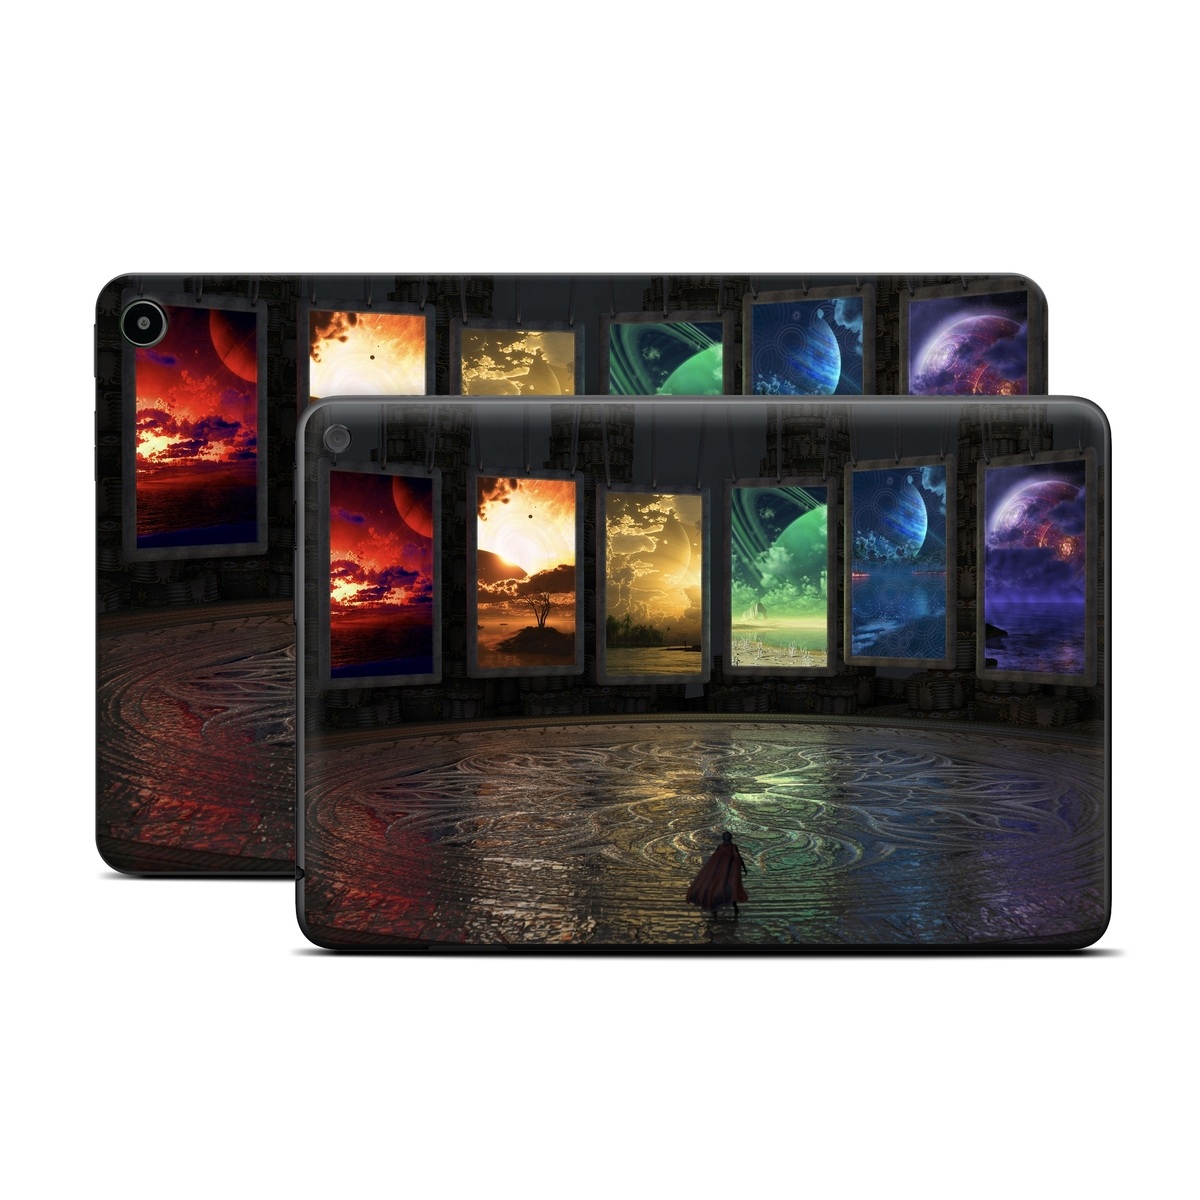 Amazon Fire Tablet Series Skin Skin design of Light, Lighting, Water, Sky, Technology, Night, Art, Geological phenomenon, Electronic device, Glass, with black, red, green, blue colors